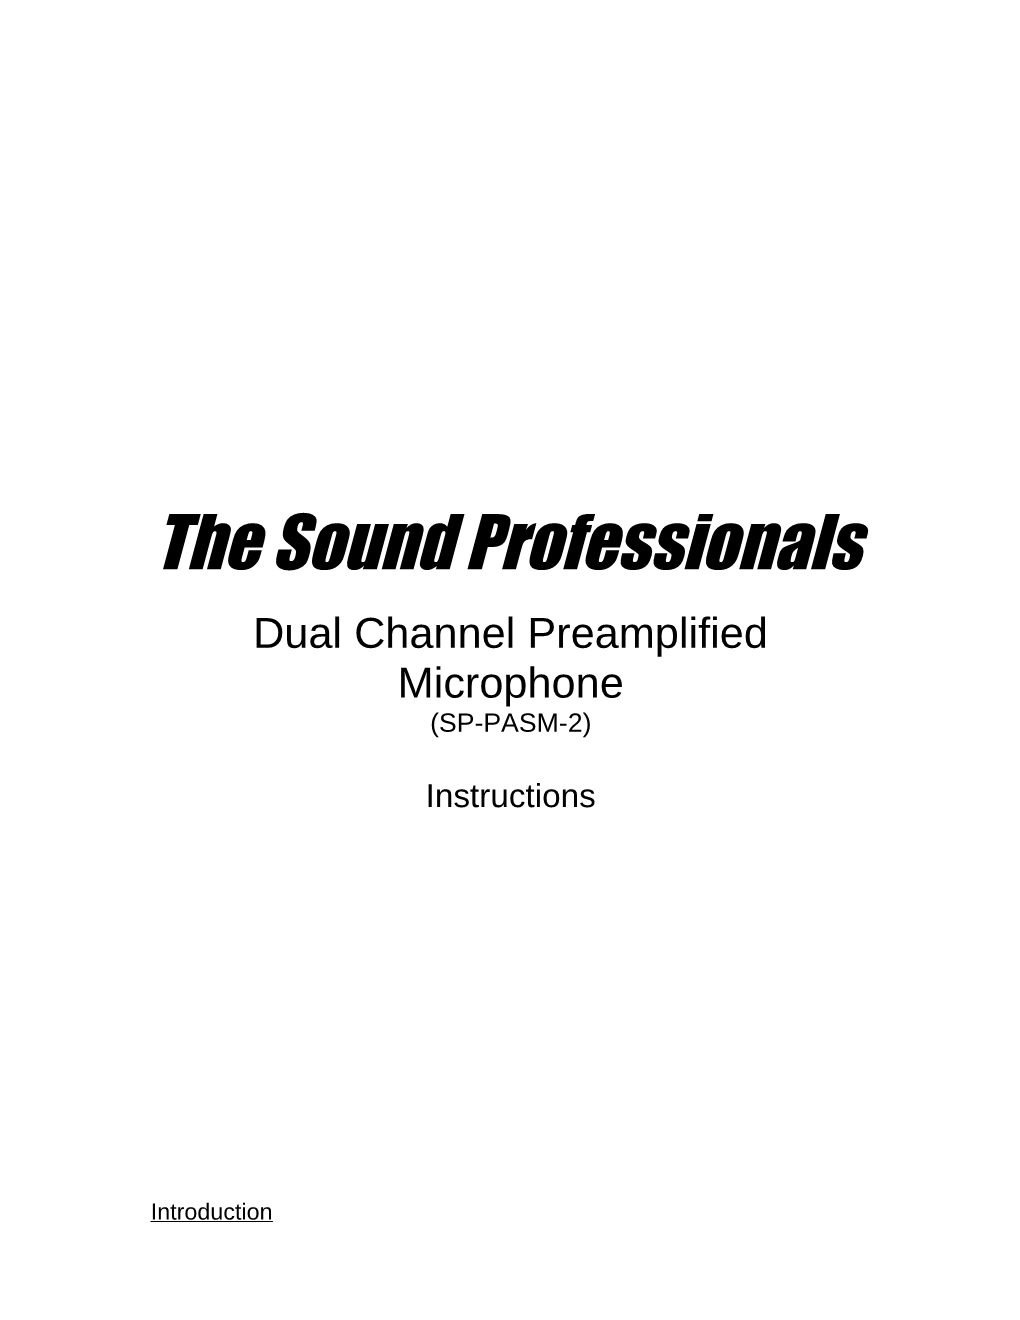 Dual Channel Preamplified Microphone